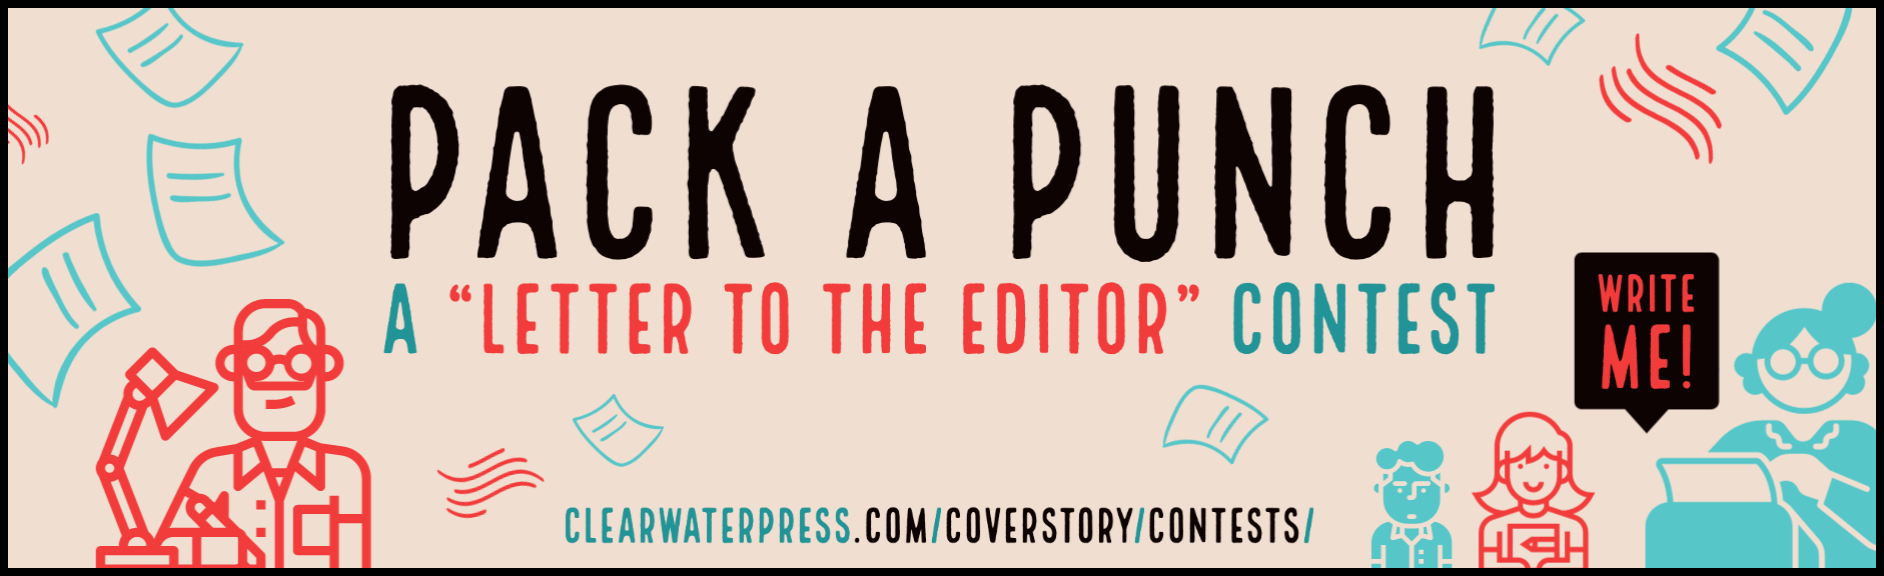 Header for Pack a Punch: A Letter to the Editor Contest for Cover Story students